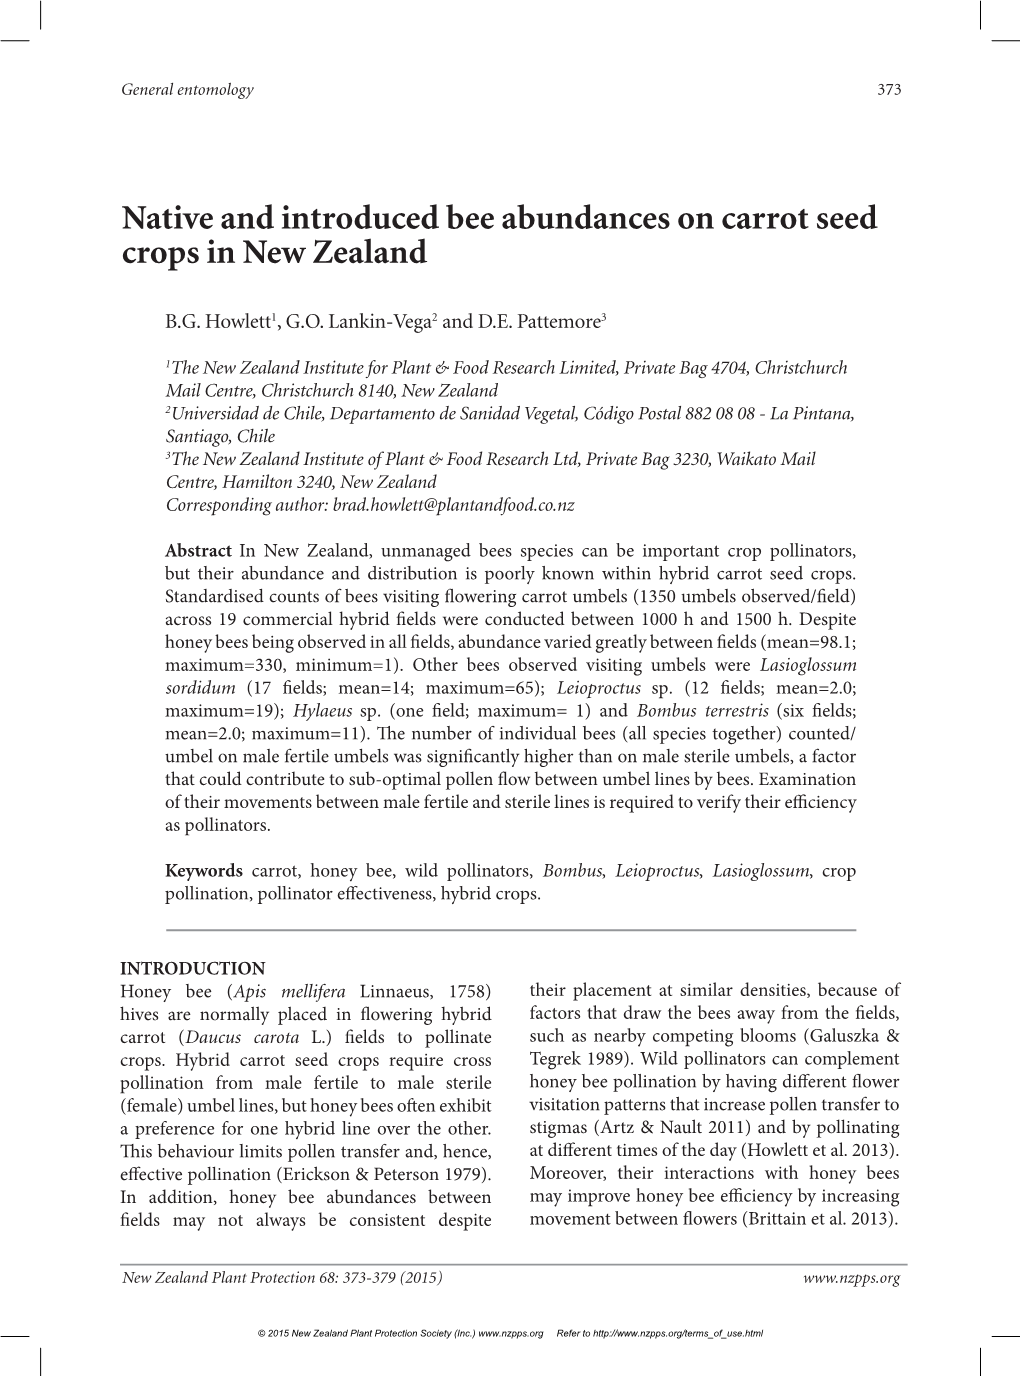 Native and Introduced Bee Abundances on Carrot Seed Crops in New Zealand